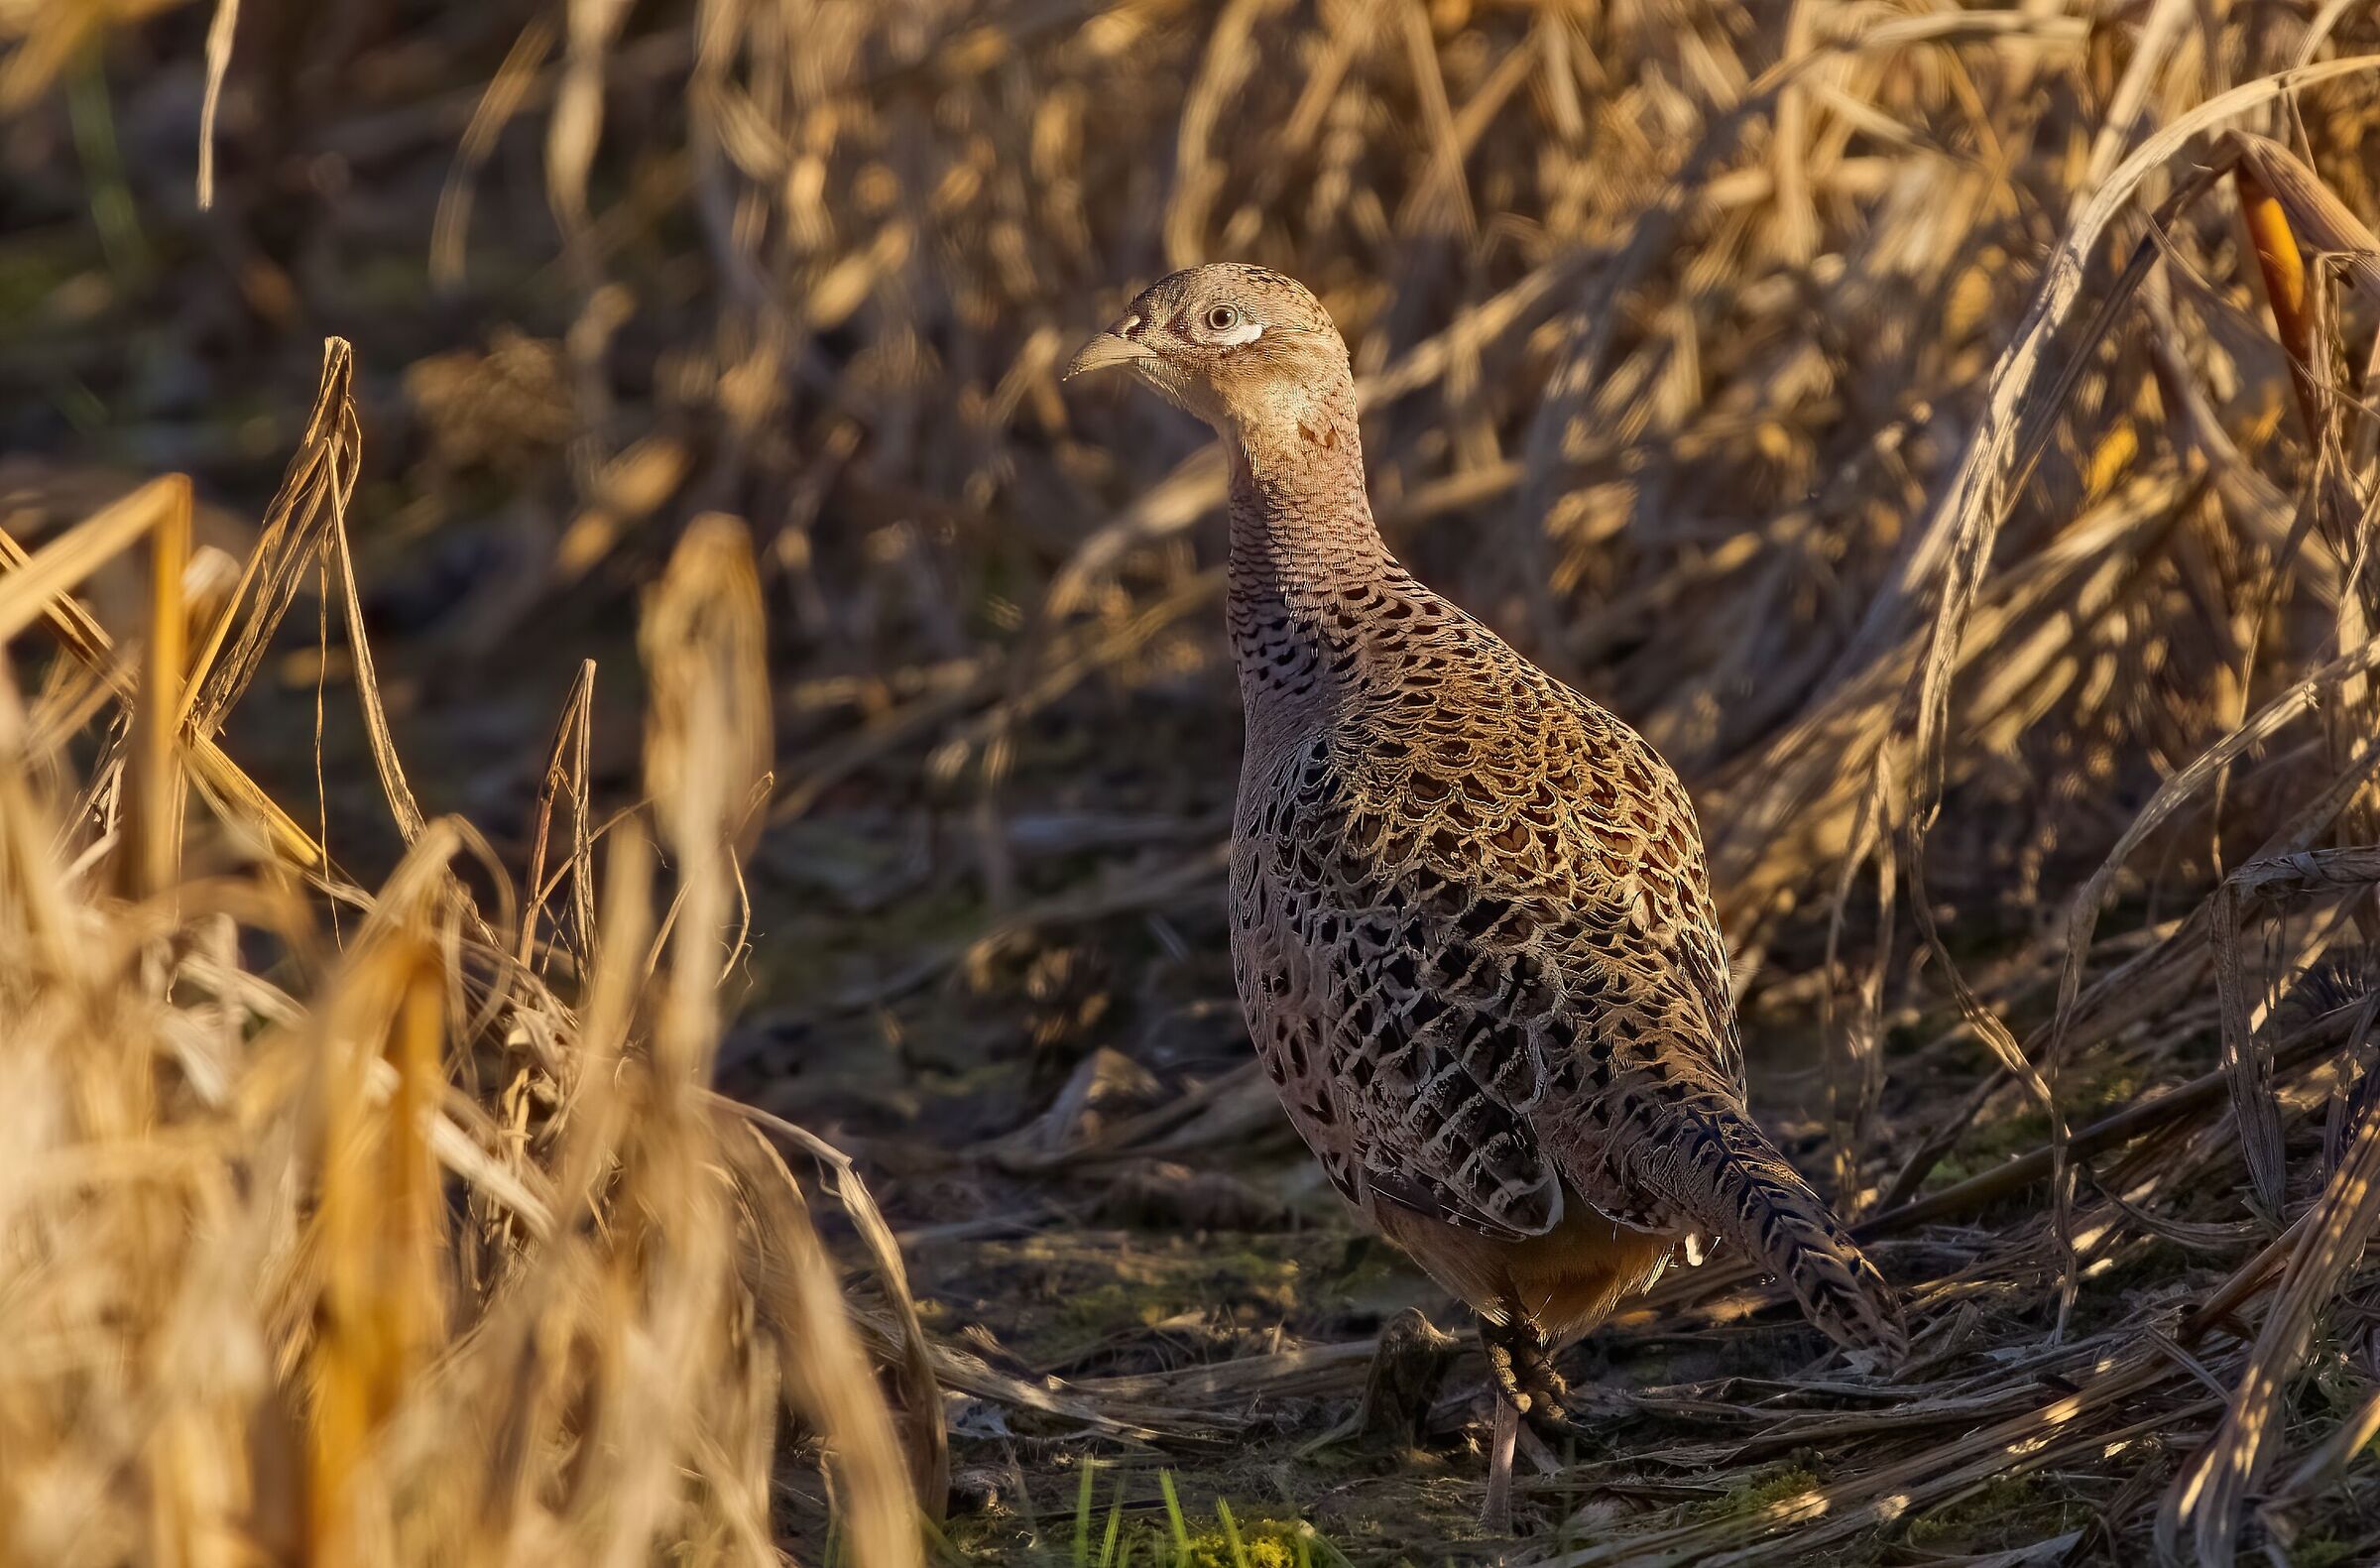 The pheasant in warm light...